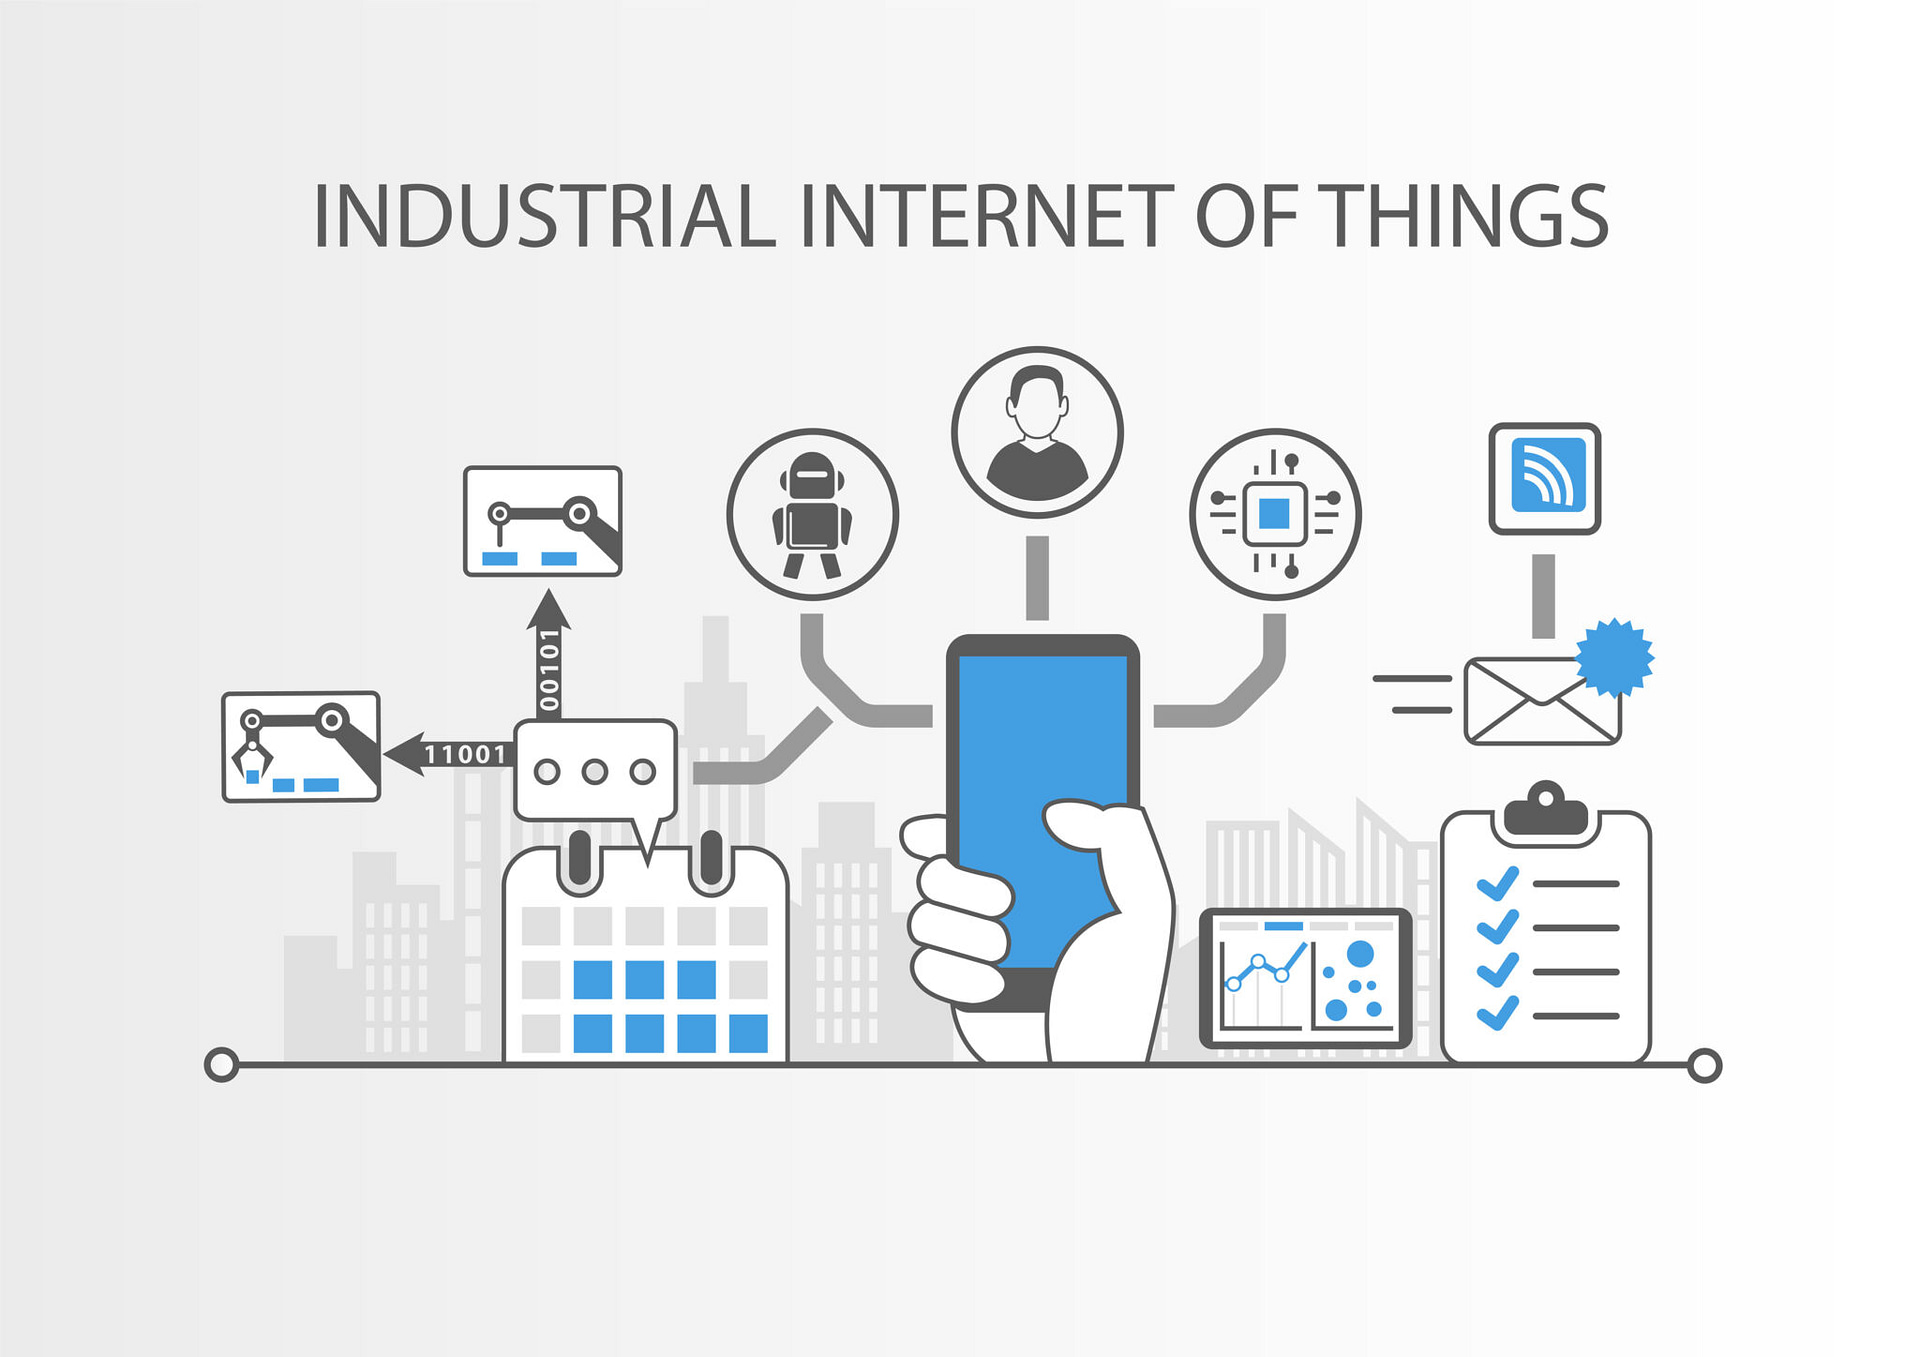 Industrial internet of things or industry 40 concept with simple icons on grey background